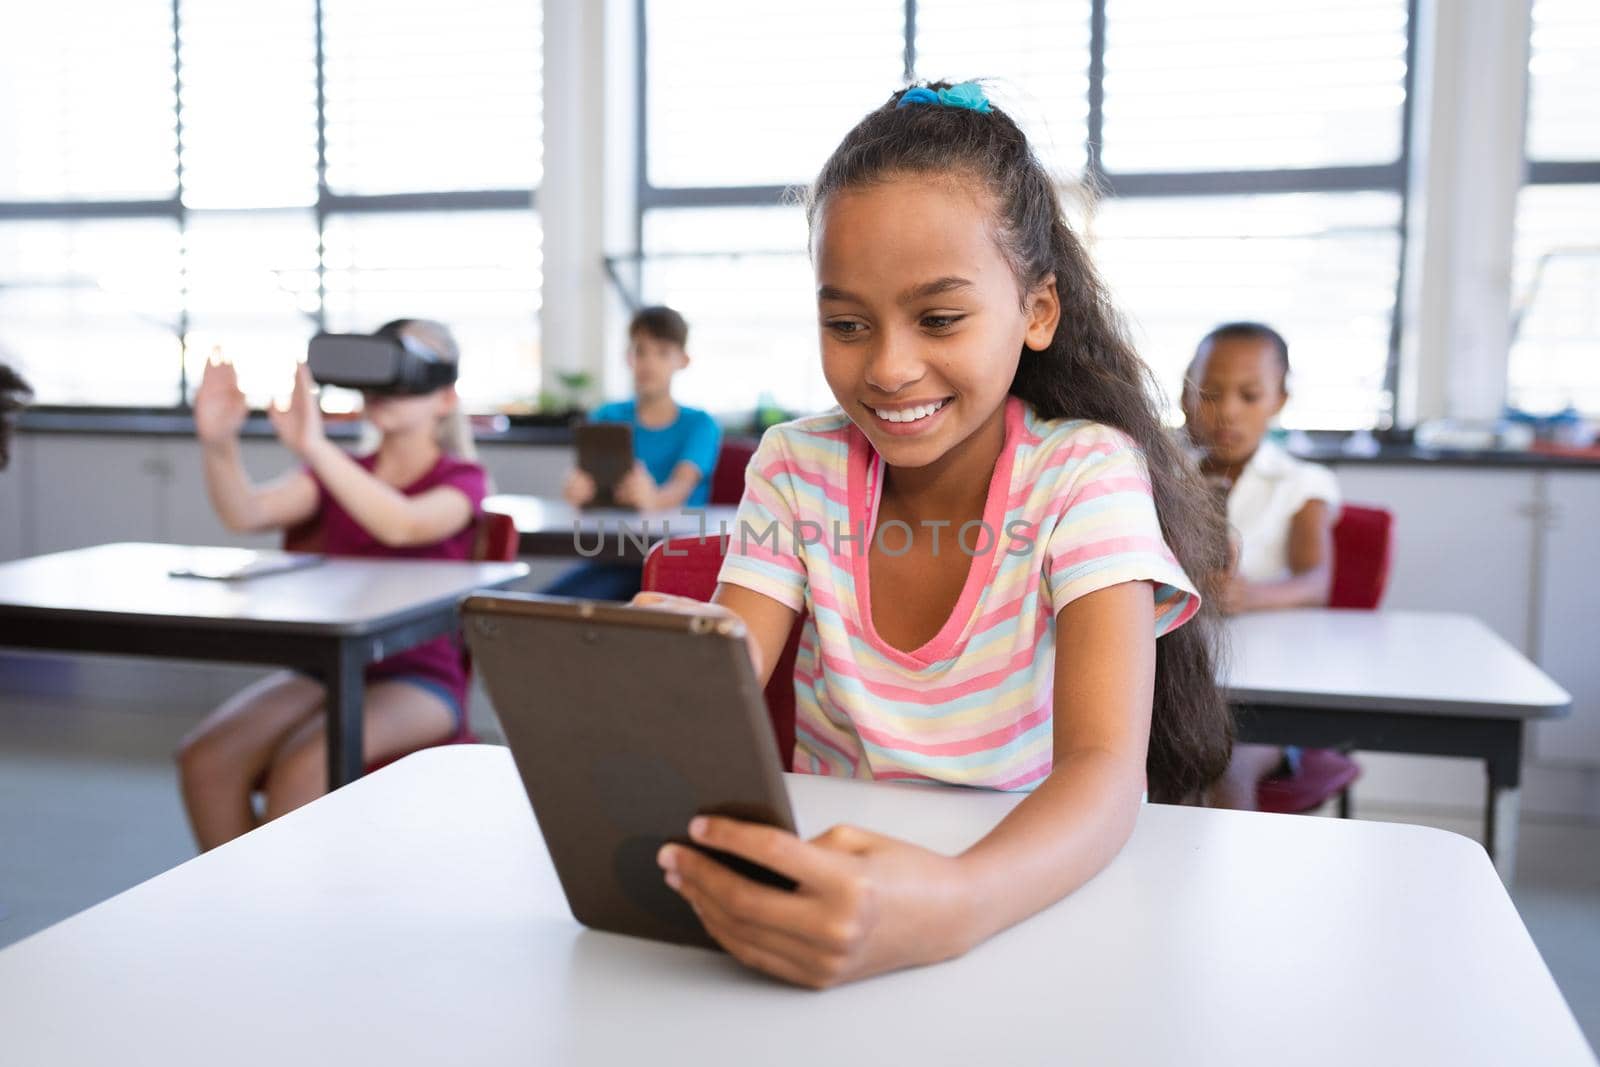 Smiling african american girl using digital tablet while sitting on her desk in class at school. school and education concept